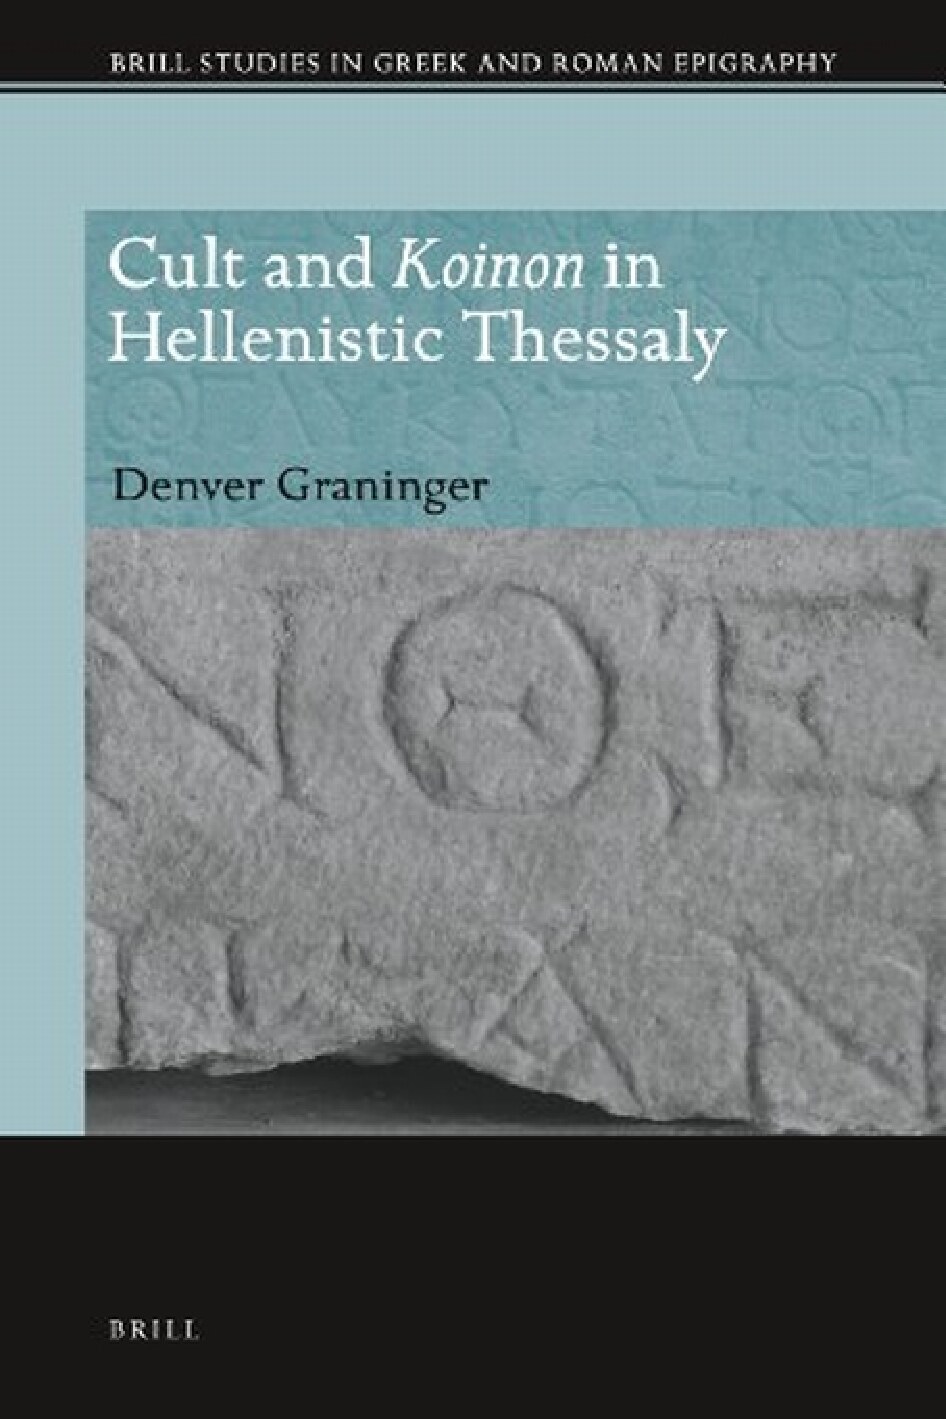 Cult and Koinon in Hellenistic Thessaly